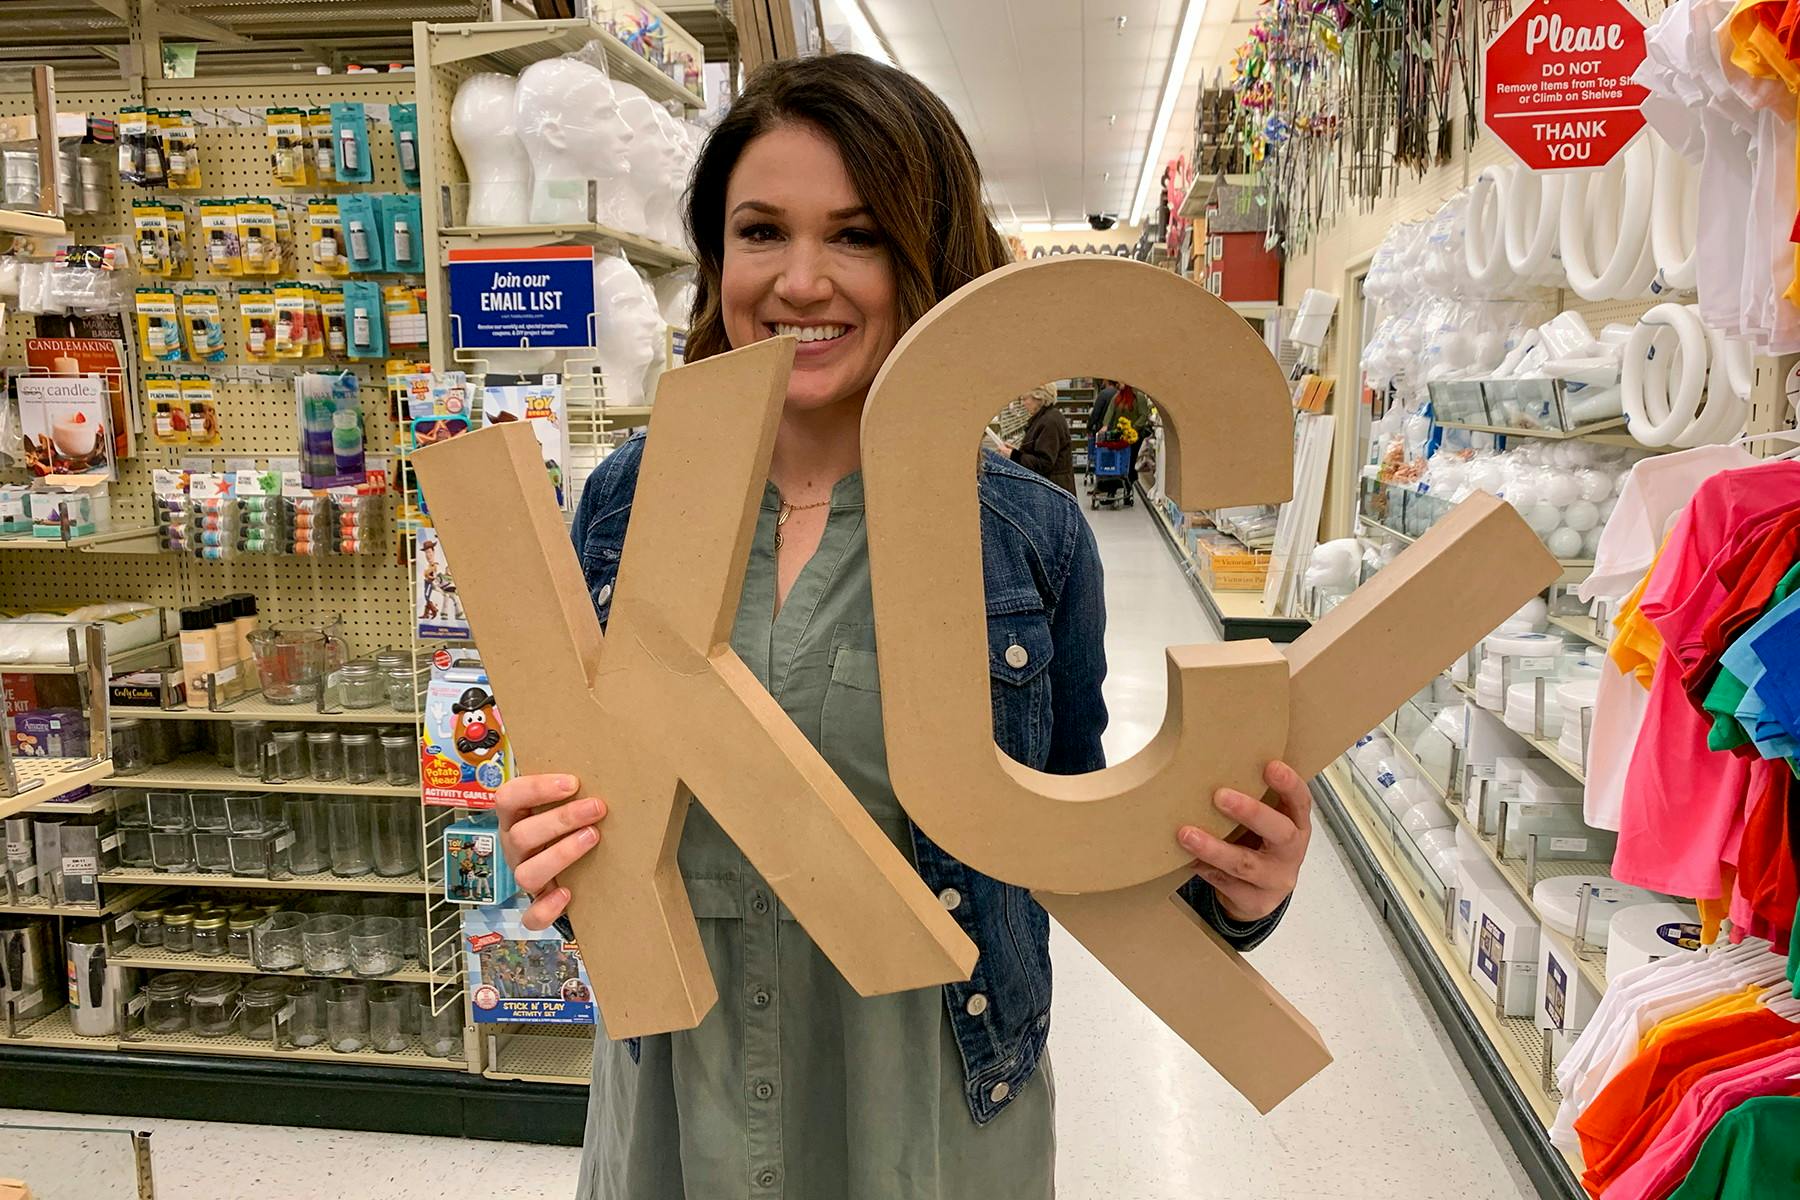 One of the owners of thekrazycouponlady.com, holding up large cardboard letters that read "KCL" in a craft store